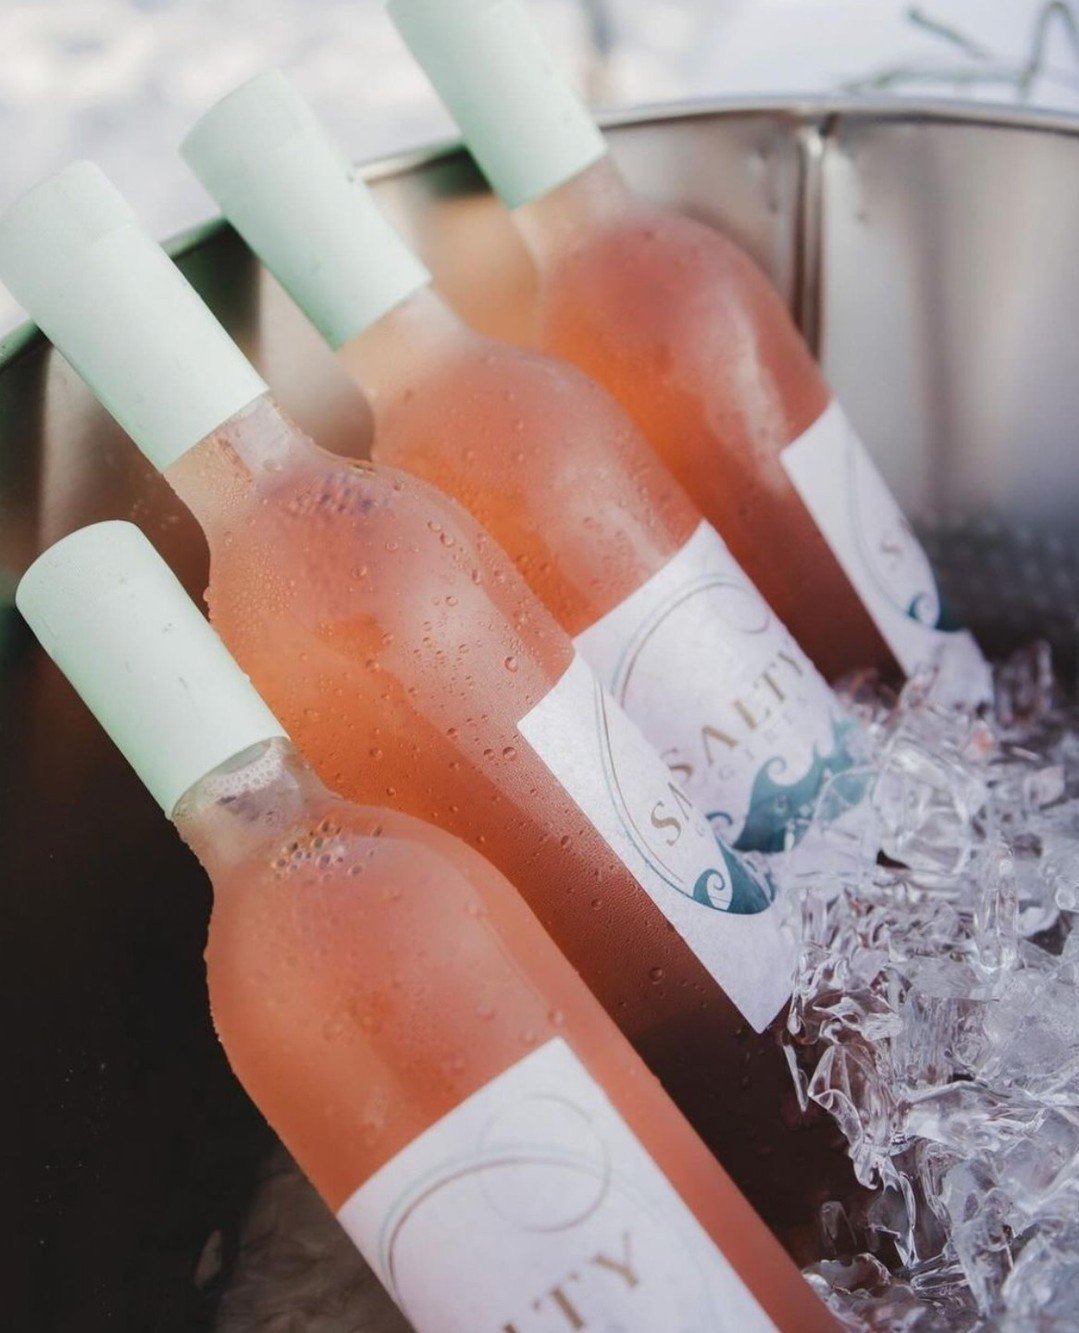 For the beach, pool, and everything in between... SALTY Ros&eacute; beach + pool friendly wine just belongs 💞⁠
⁠
⁠
🥂 Shop at saltybeverages.com ⁠
⁠
Beach-safe Ros&eacute; in a full-size, luxe plastic bottle | #sipsalty #winelover #30a #rosewine #fl